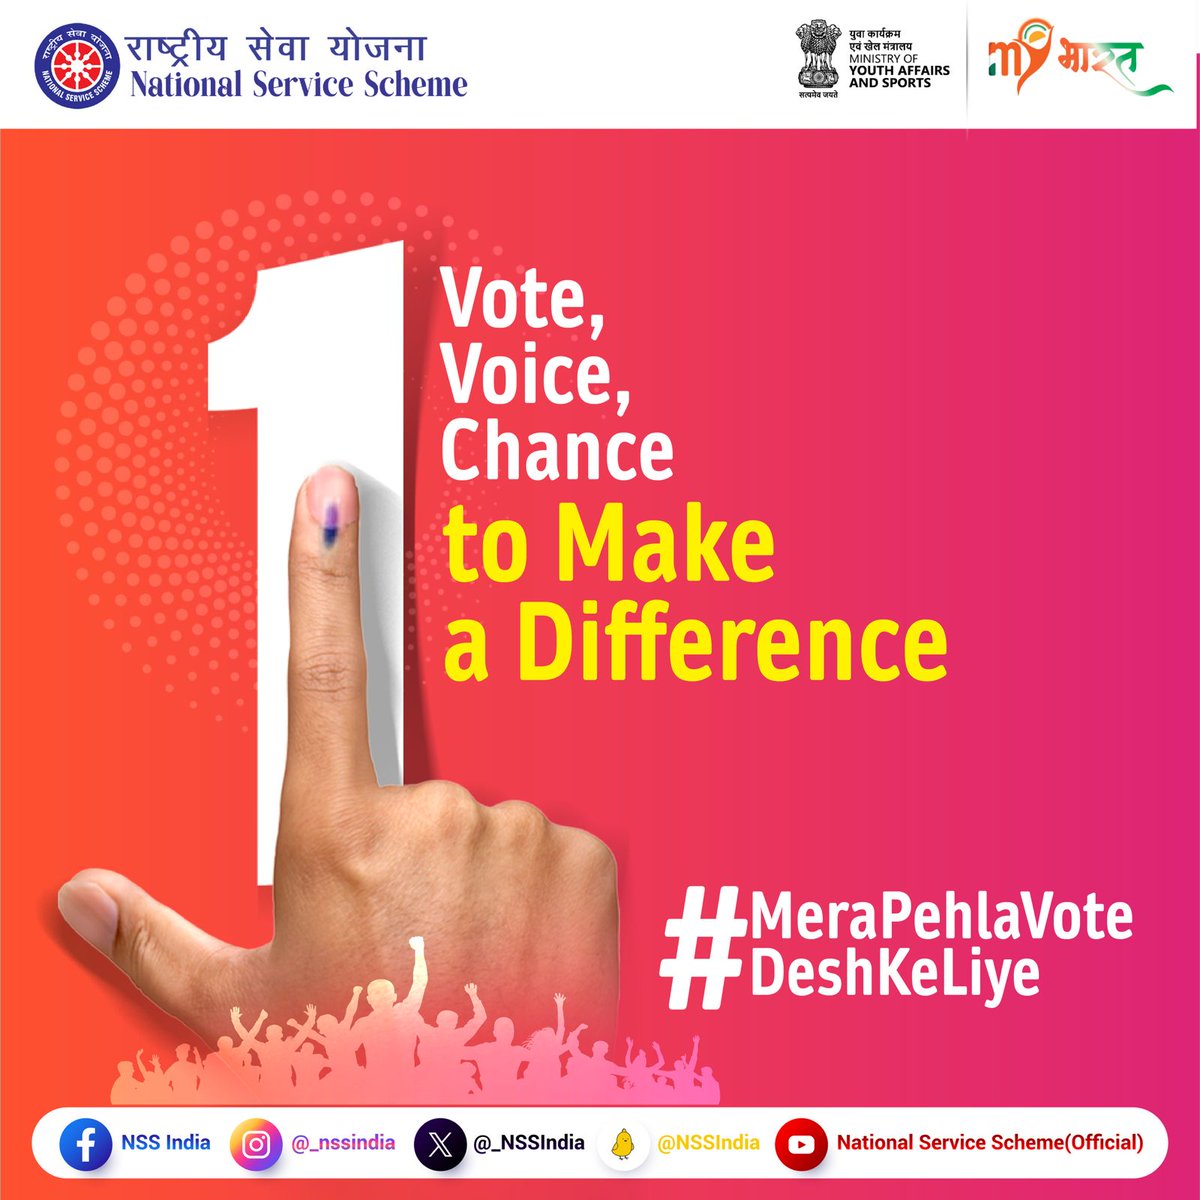 Your first vote is not just a right, it's a powerful expression of hope and change. Let's make our voices heard and shape the future of our nation!

#voterawareness #MeraPehlaVoteDeshKeLiye #Vote4Sure